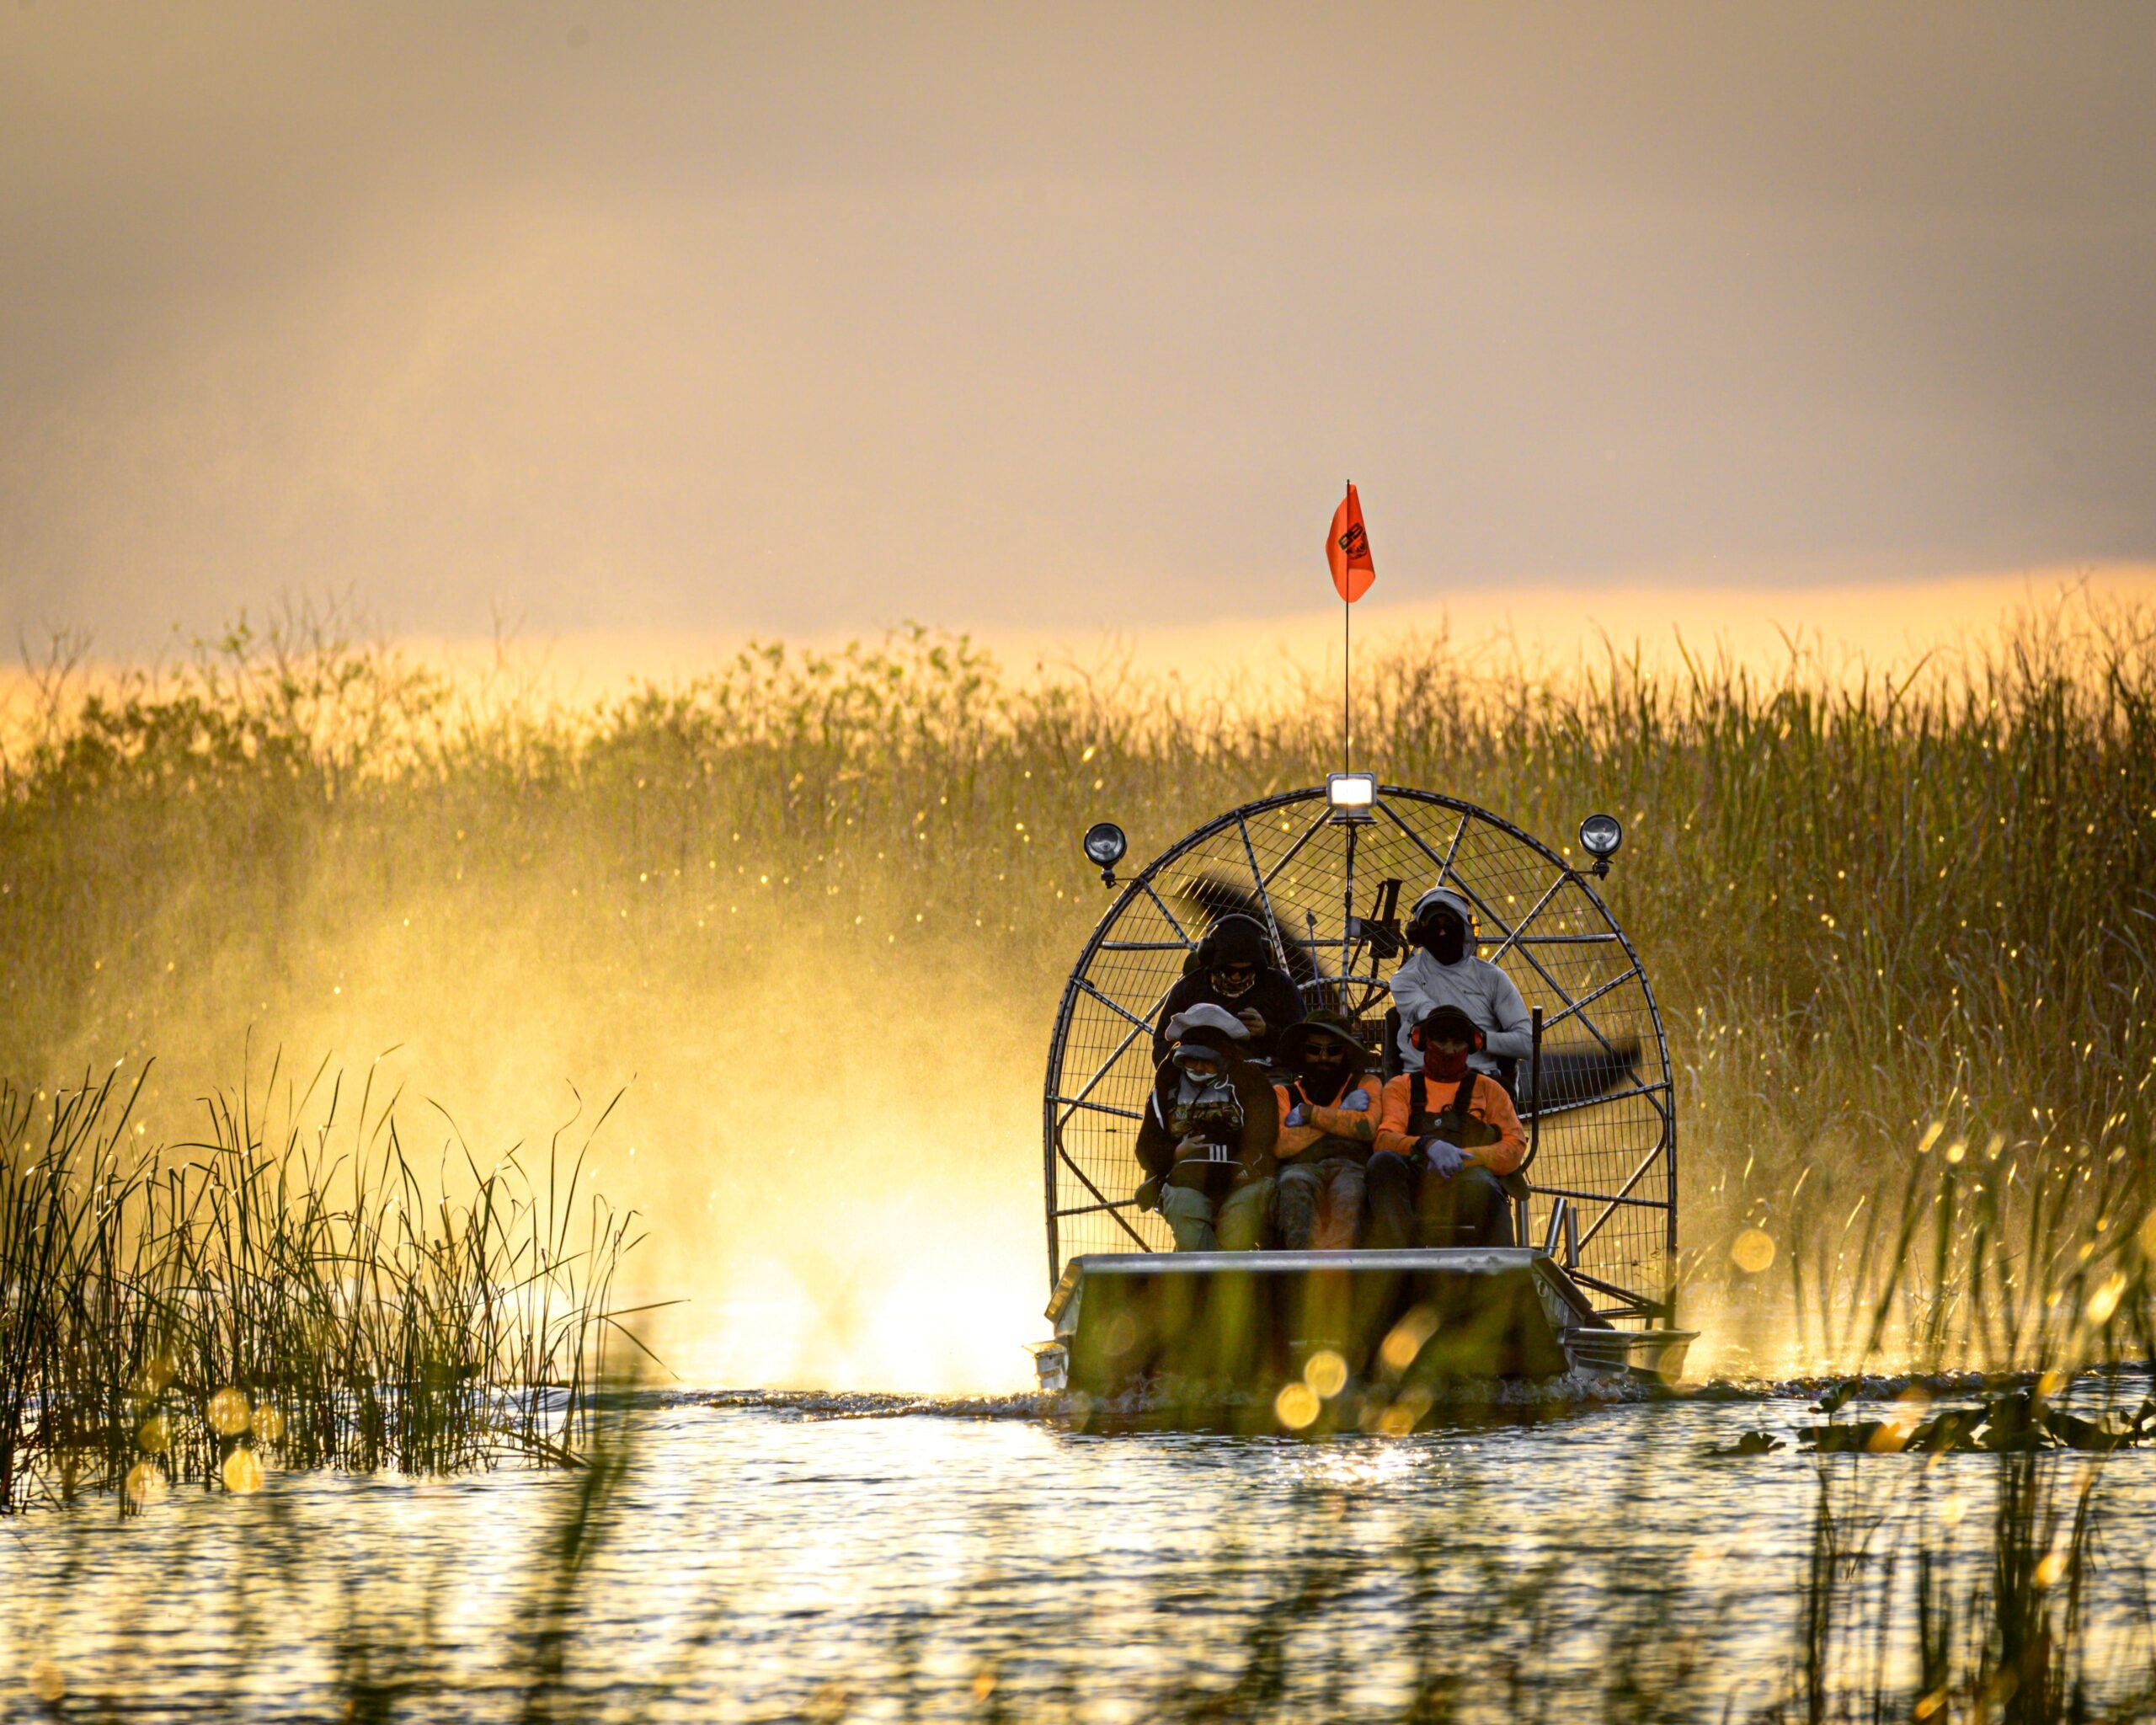 The Everglades: An Airboat Adventure to See the Alligators From Orlando